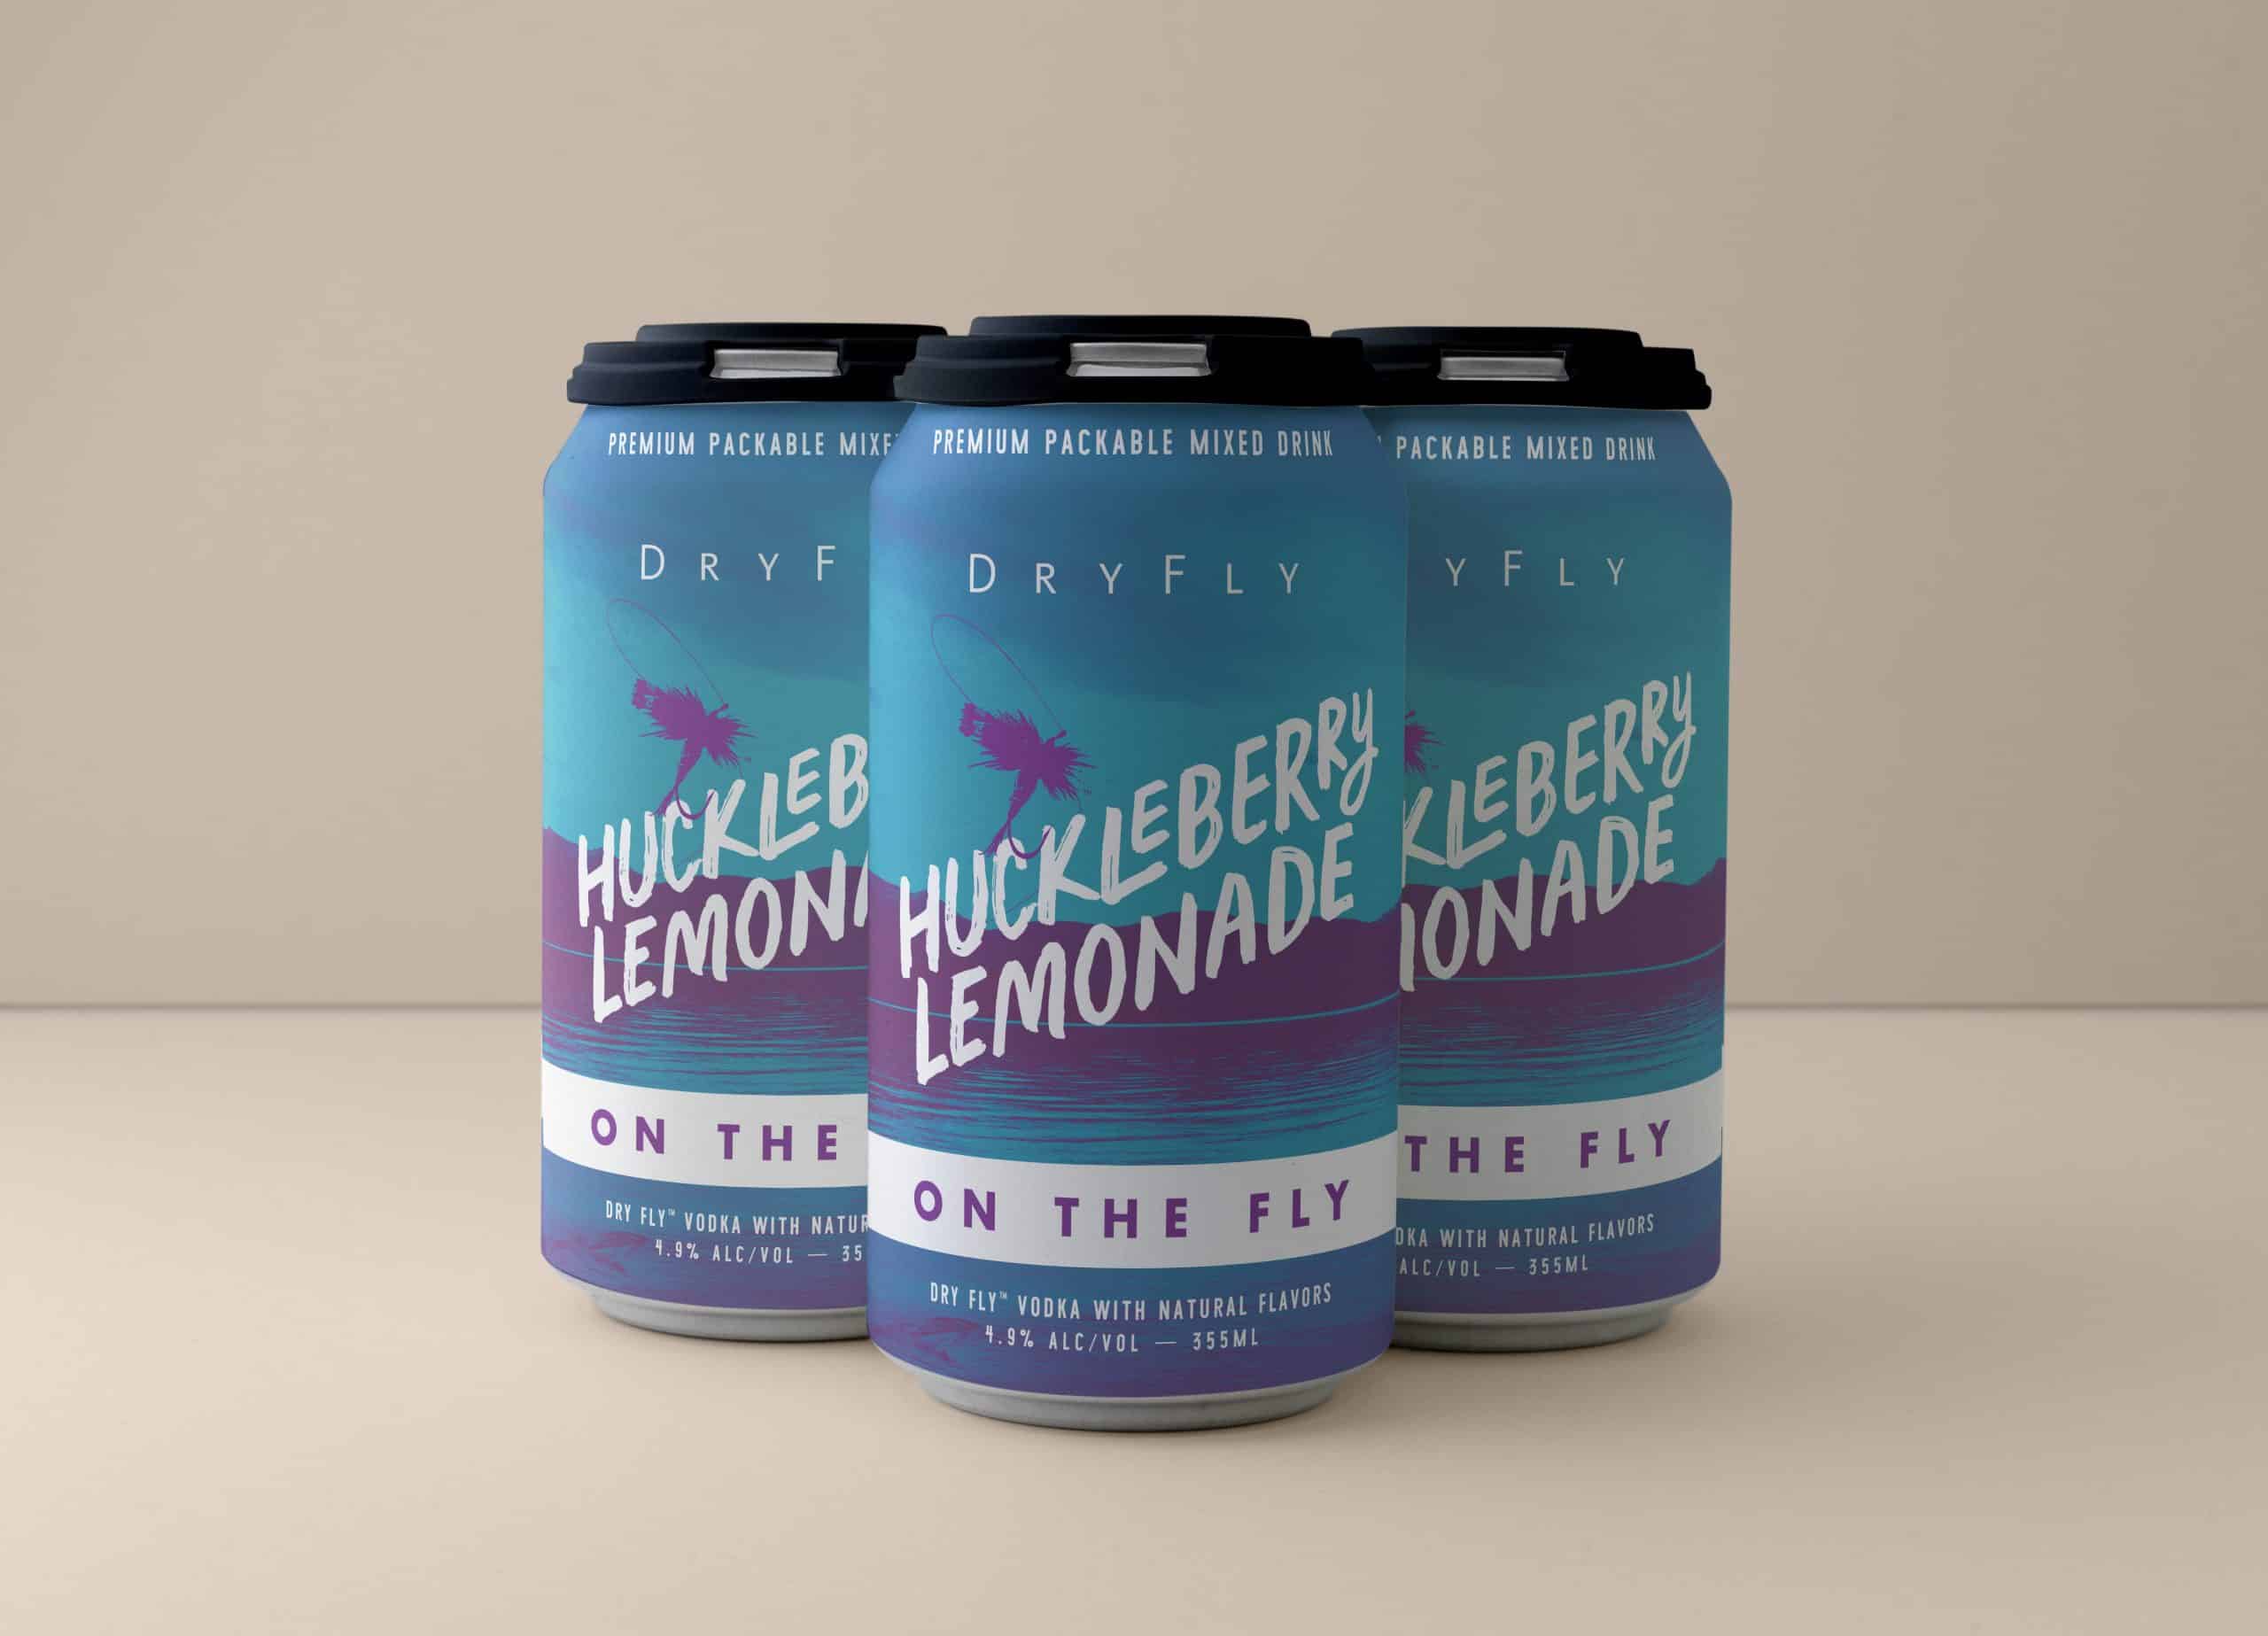 4 Pack of Huckleberry Lemonade Canned Cocktail